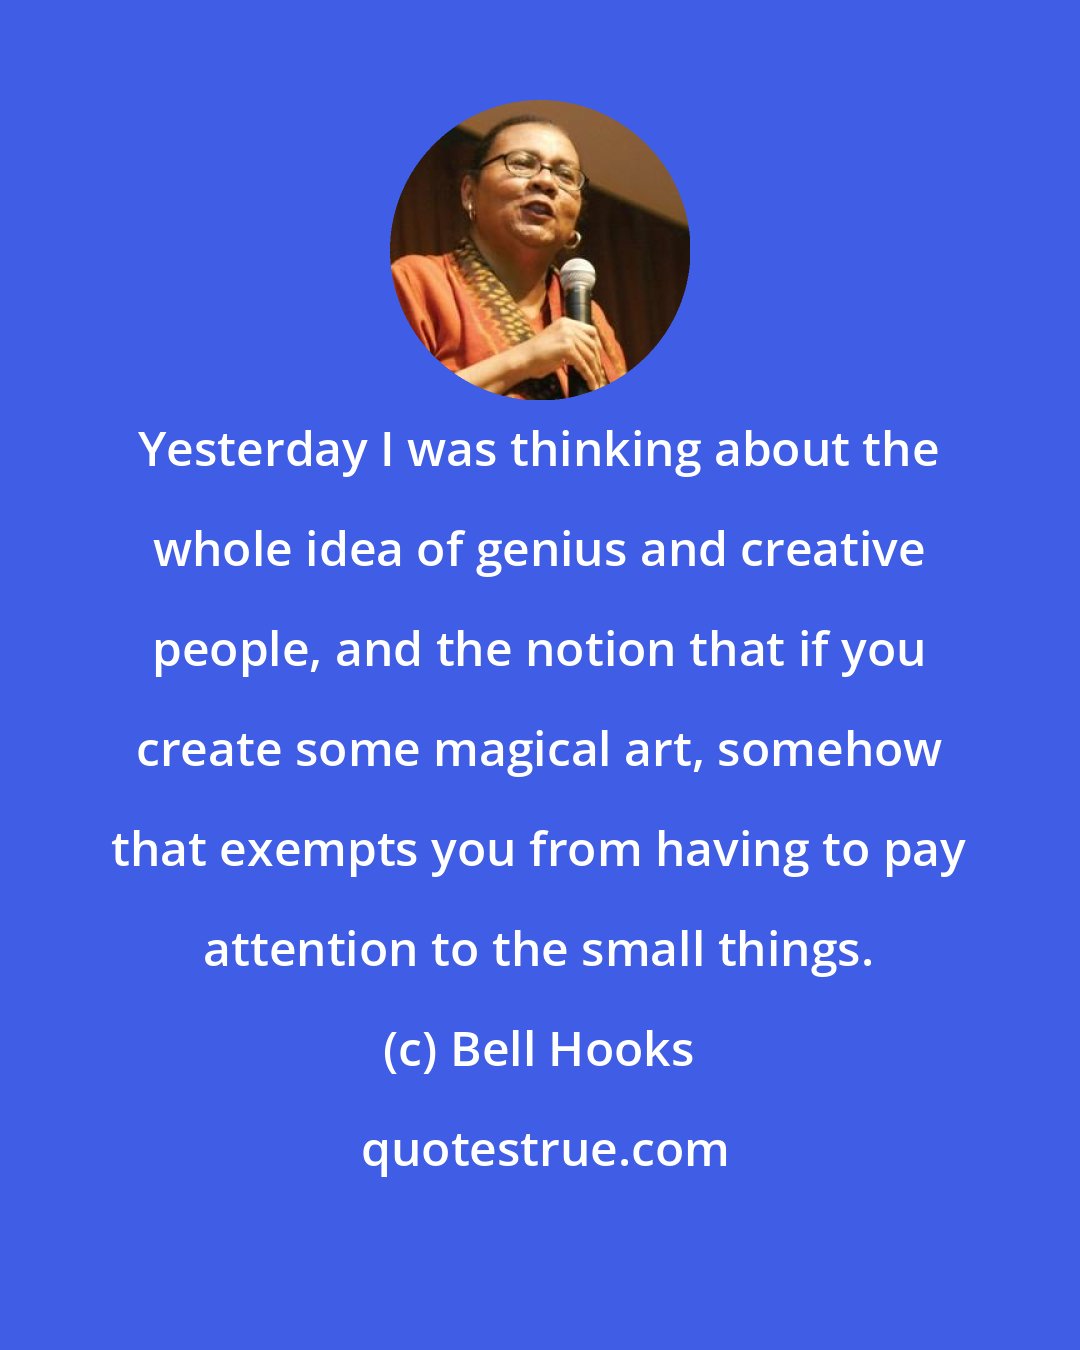 Bell Hooks: Yesterday I was thinking about the whole idea of genius and creative people, and the notion that if you create some magical art, somehow that exempts you from having to pay attention to the small things.